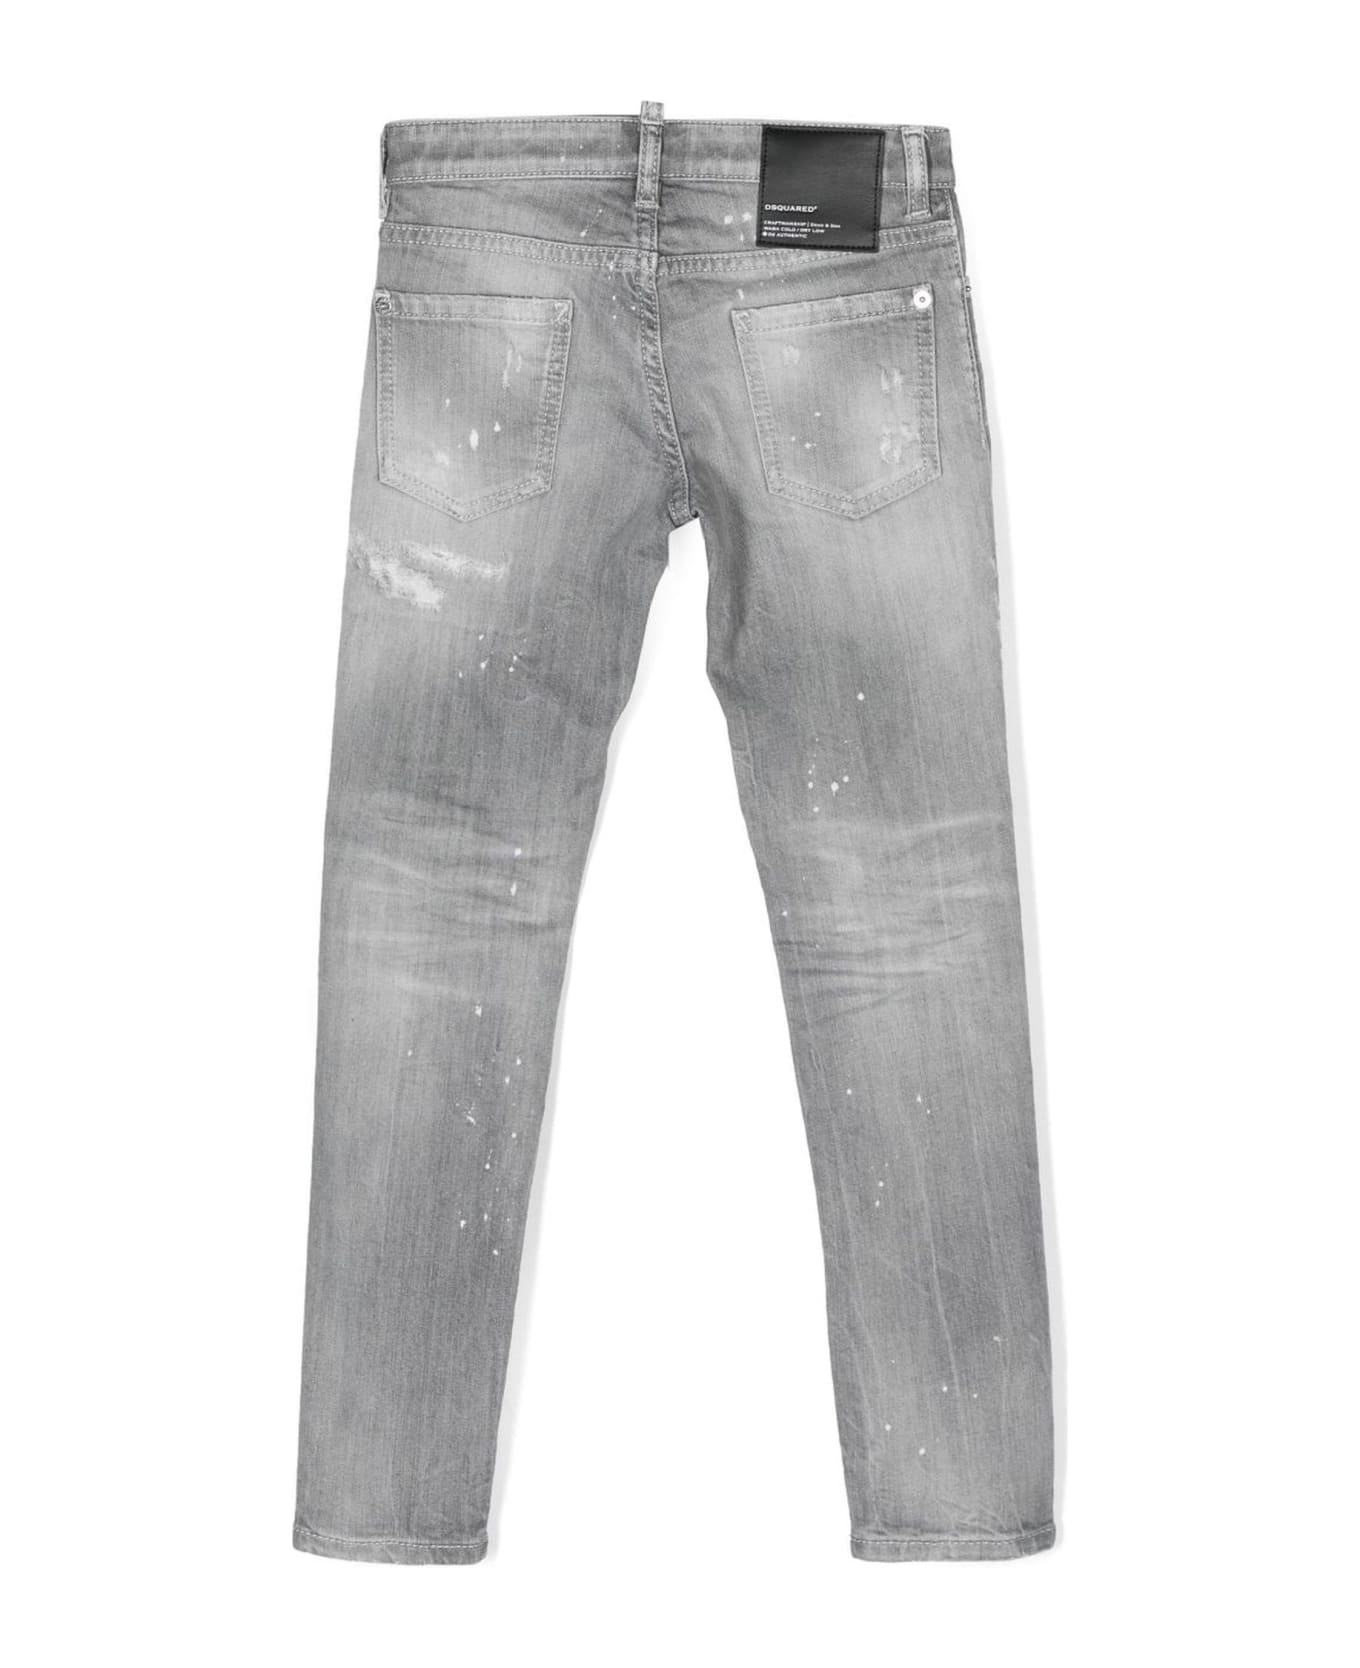 Dsquared2 Jeans Grey - Grey